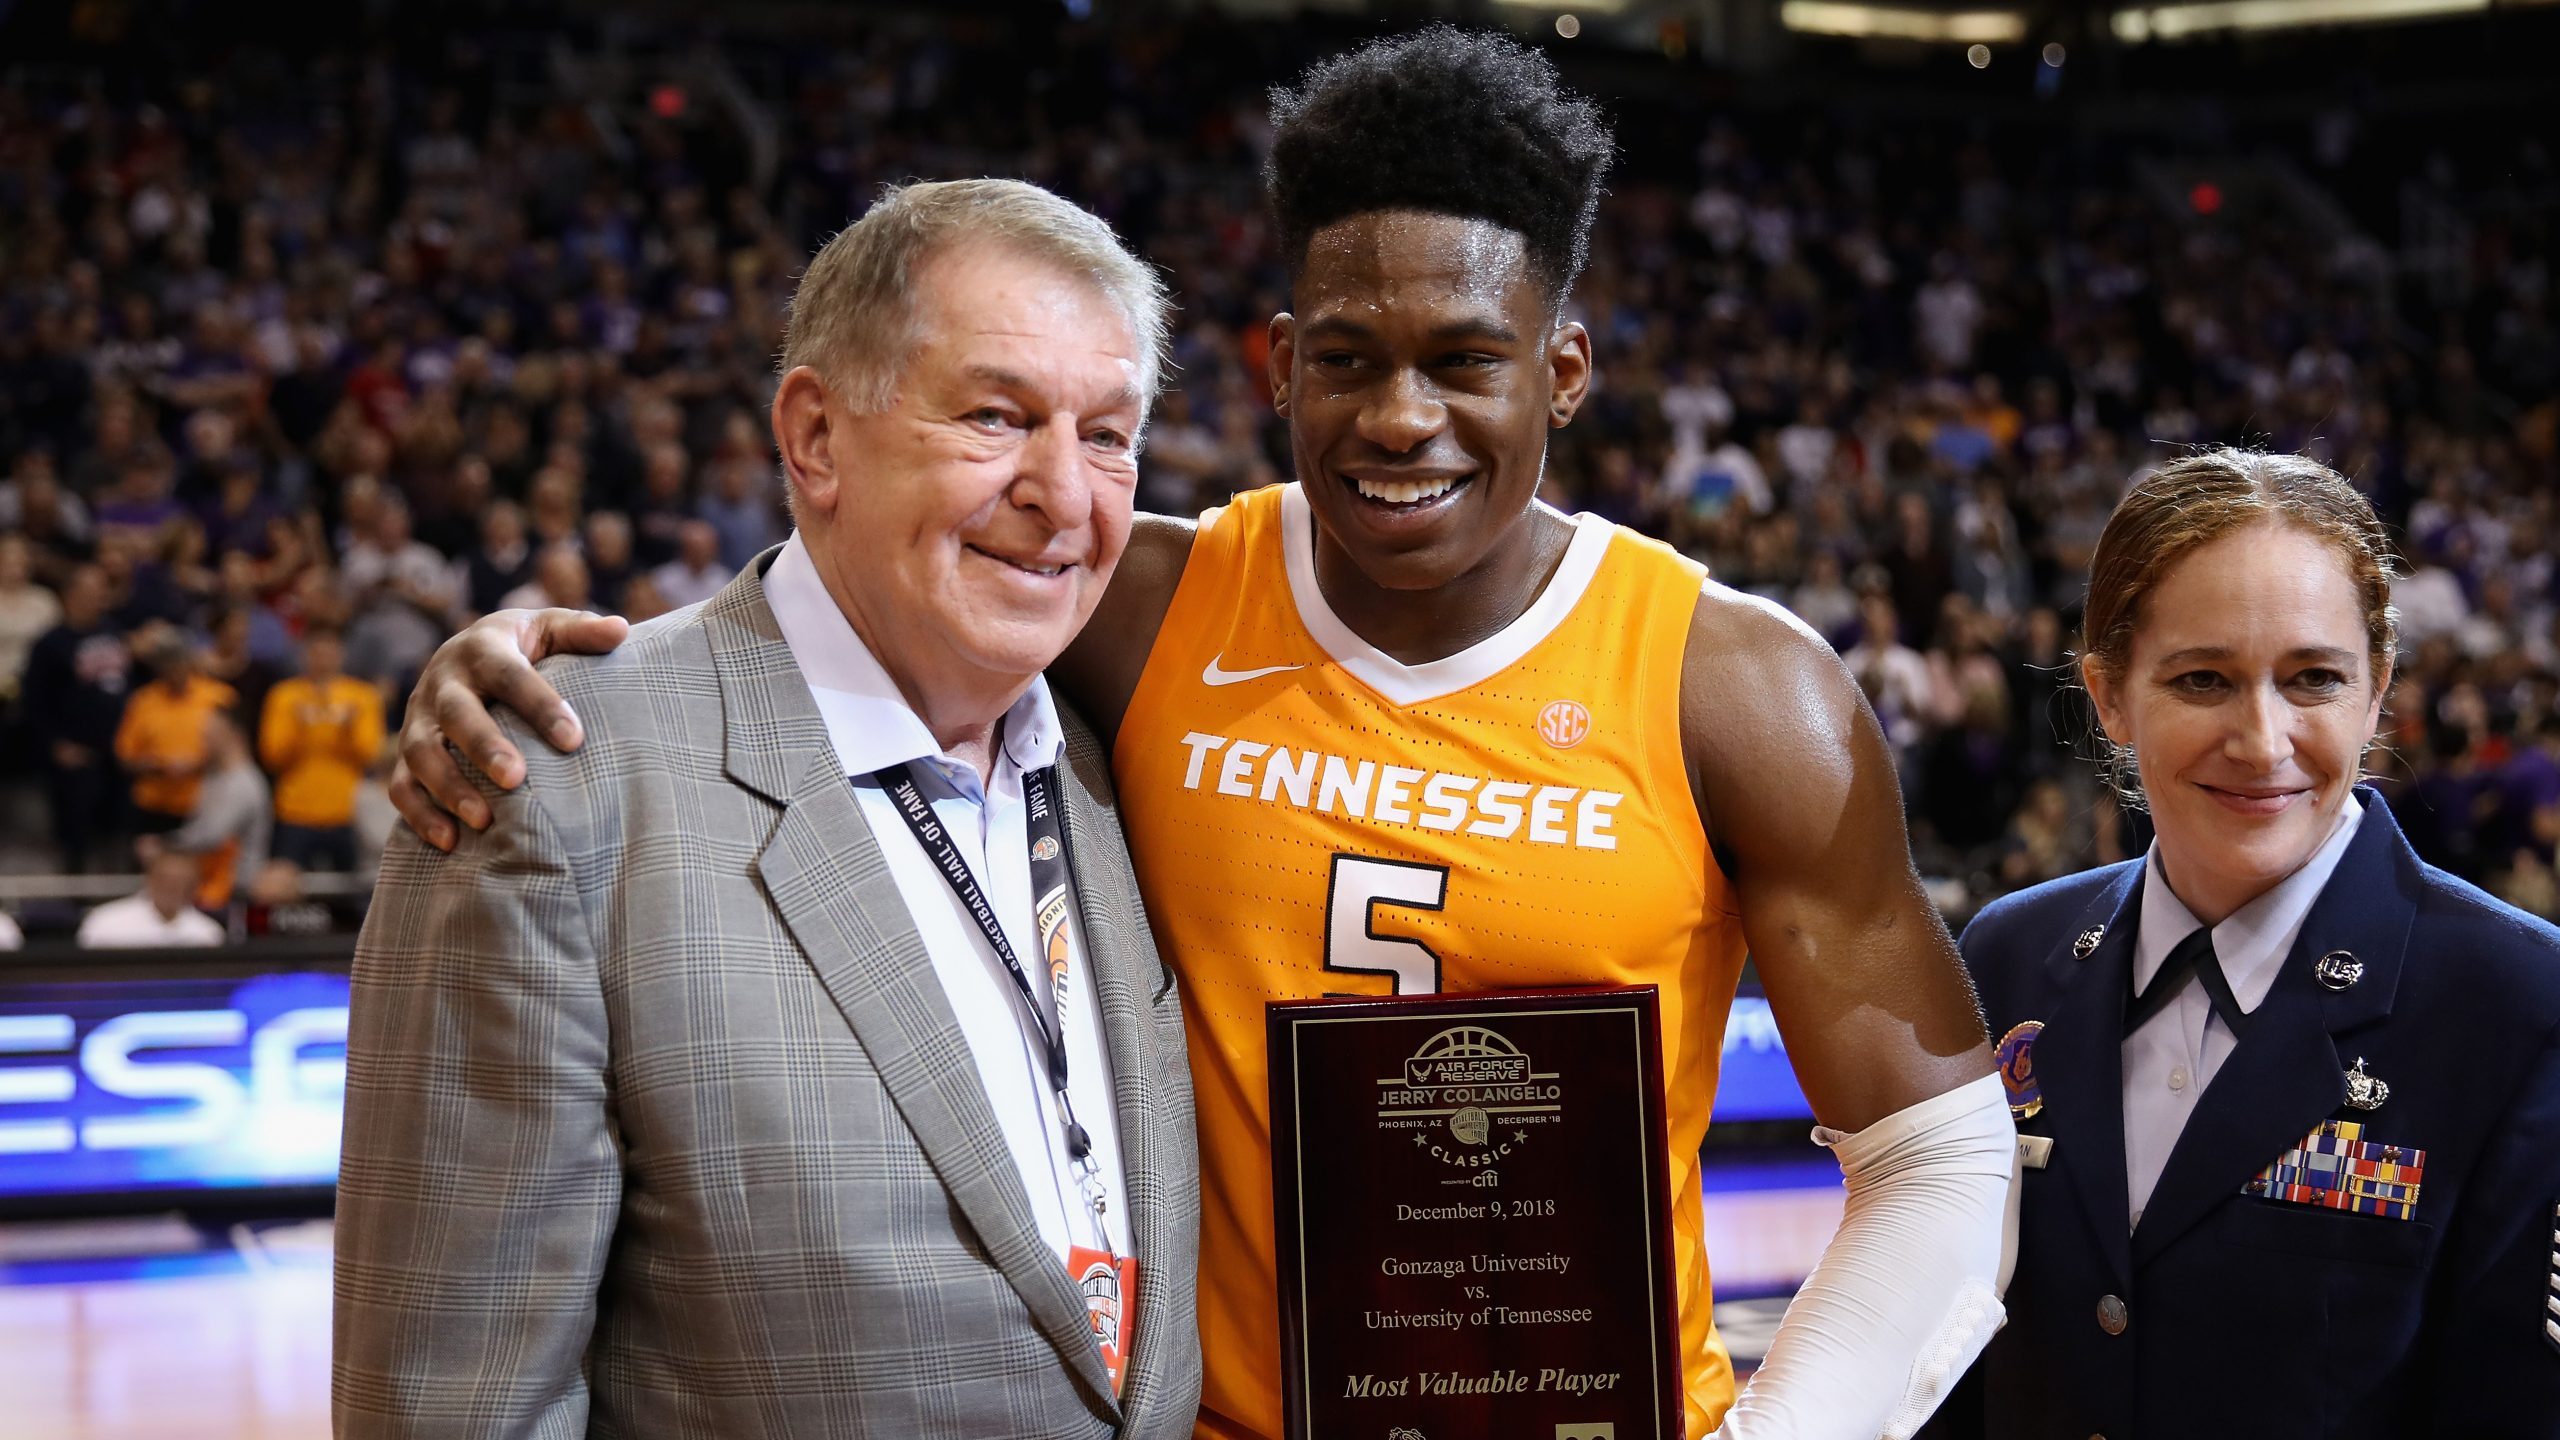 Admiral Schofield #5 of the Tennessee Volunteers is awarded the MVP trophy from Jerry Colangelo fol...